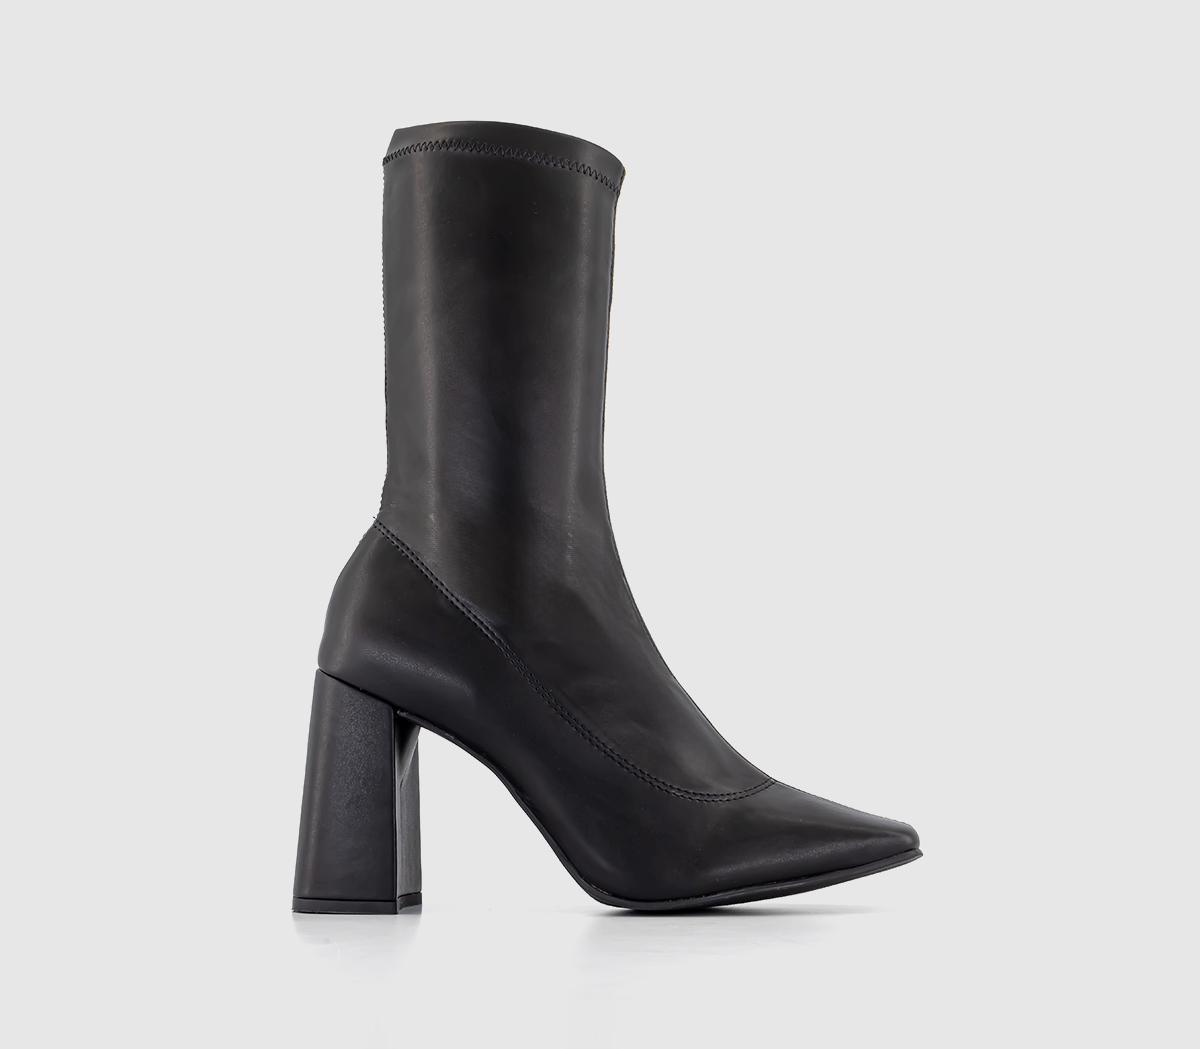 OFFICEActivate Heeled Sock BootsBlack Faux Leather